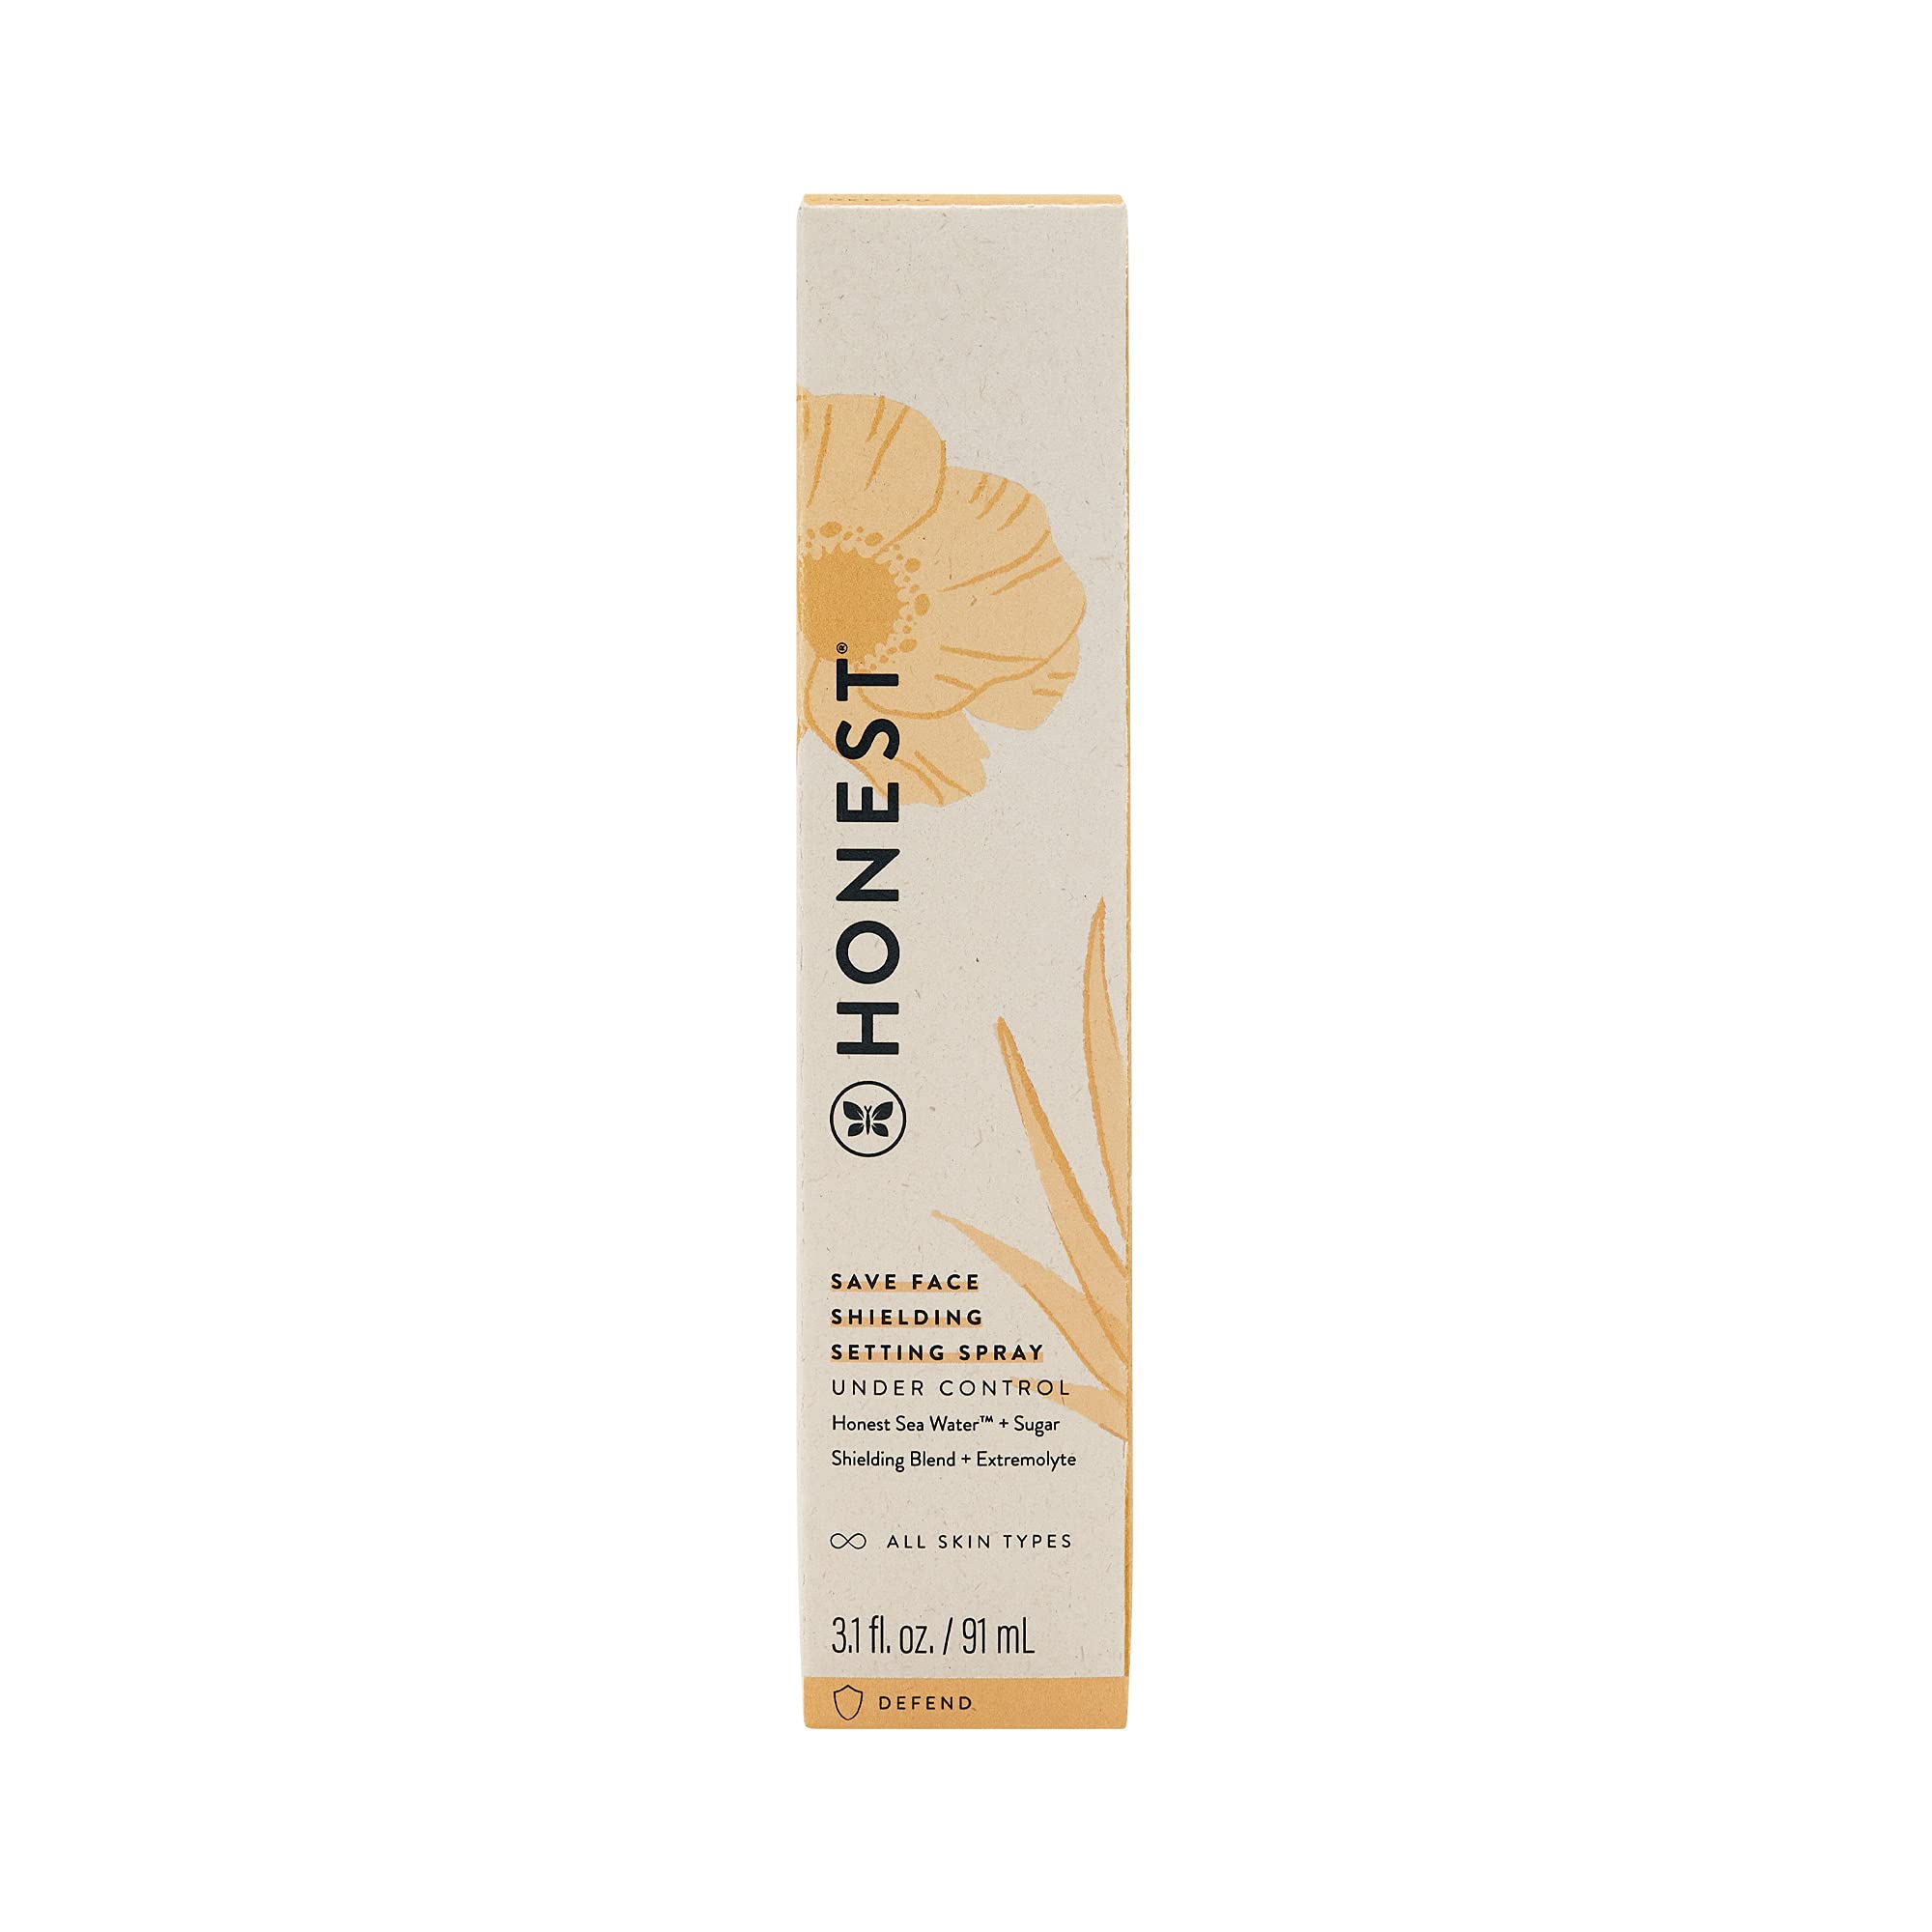 Honest Beauty Save Face Shielding Setting Spray with Extremolyte | Defend against UV and blue light | Oil free + EWG Certified + Vegan + Cruelty free | 3.1 fl. oz.